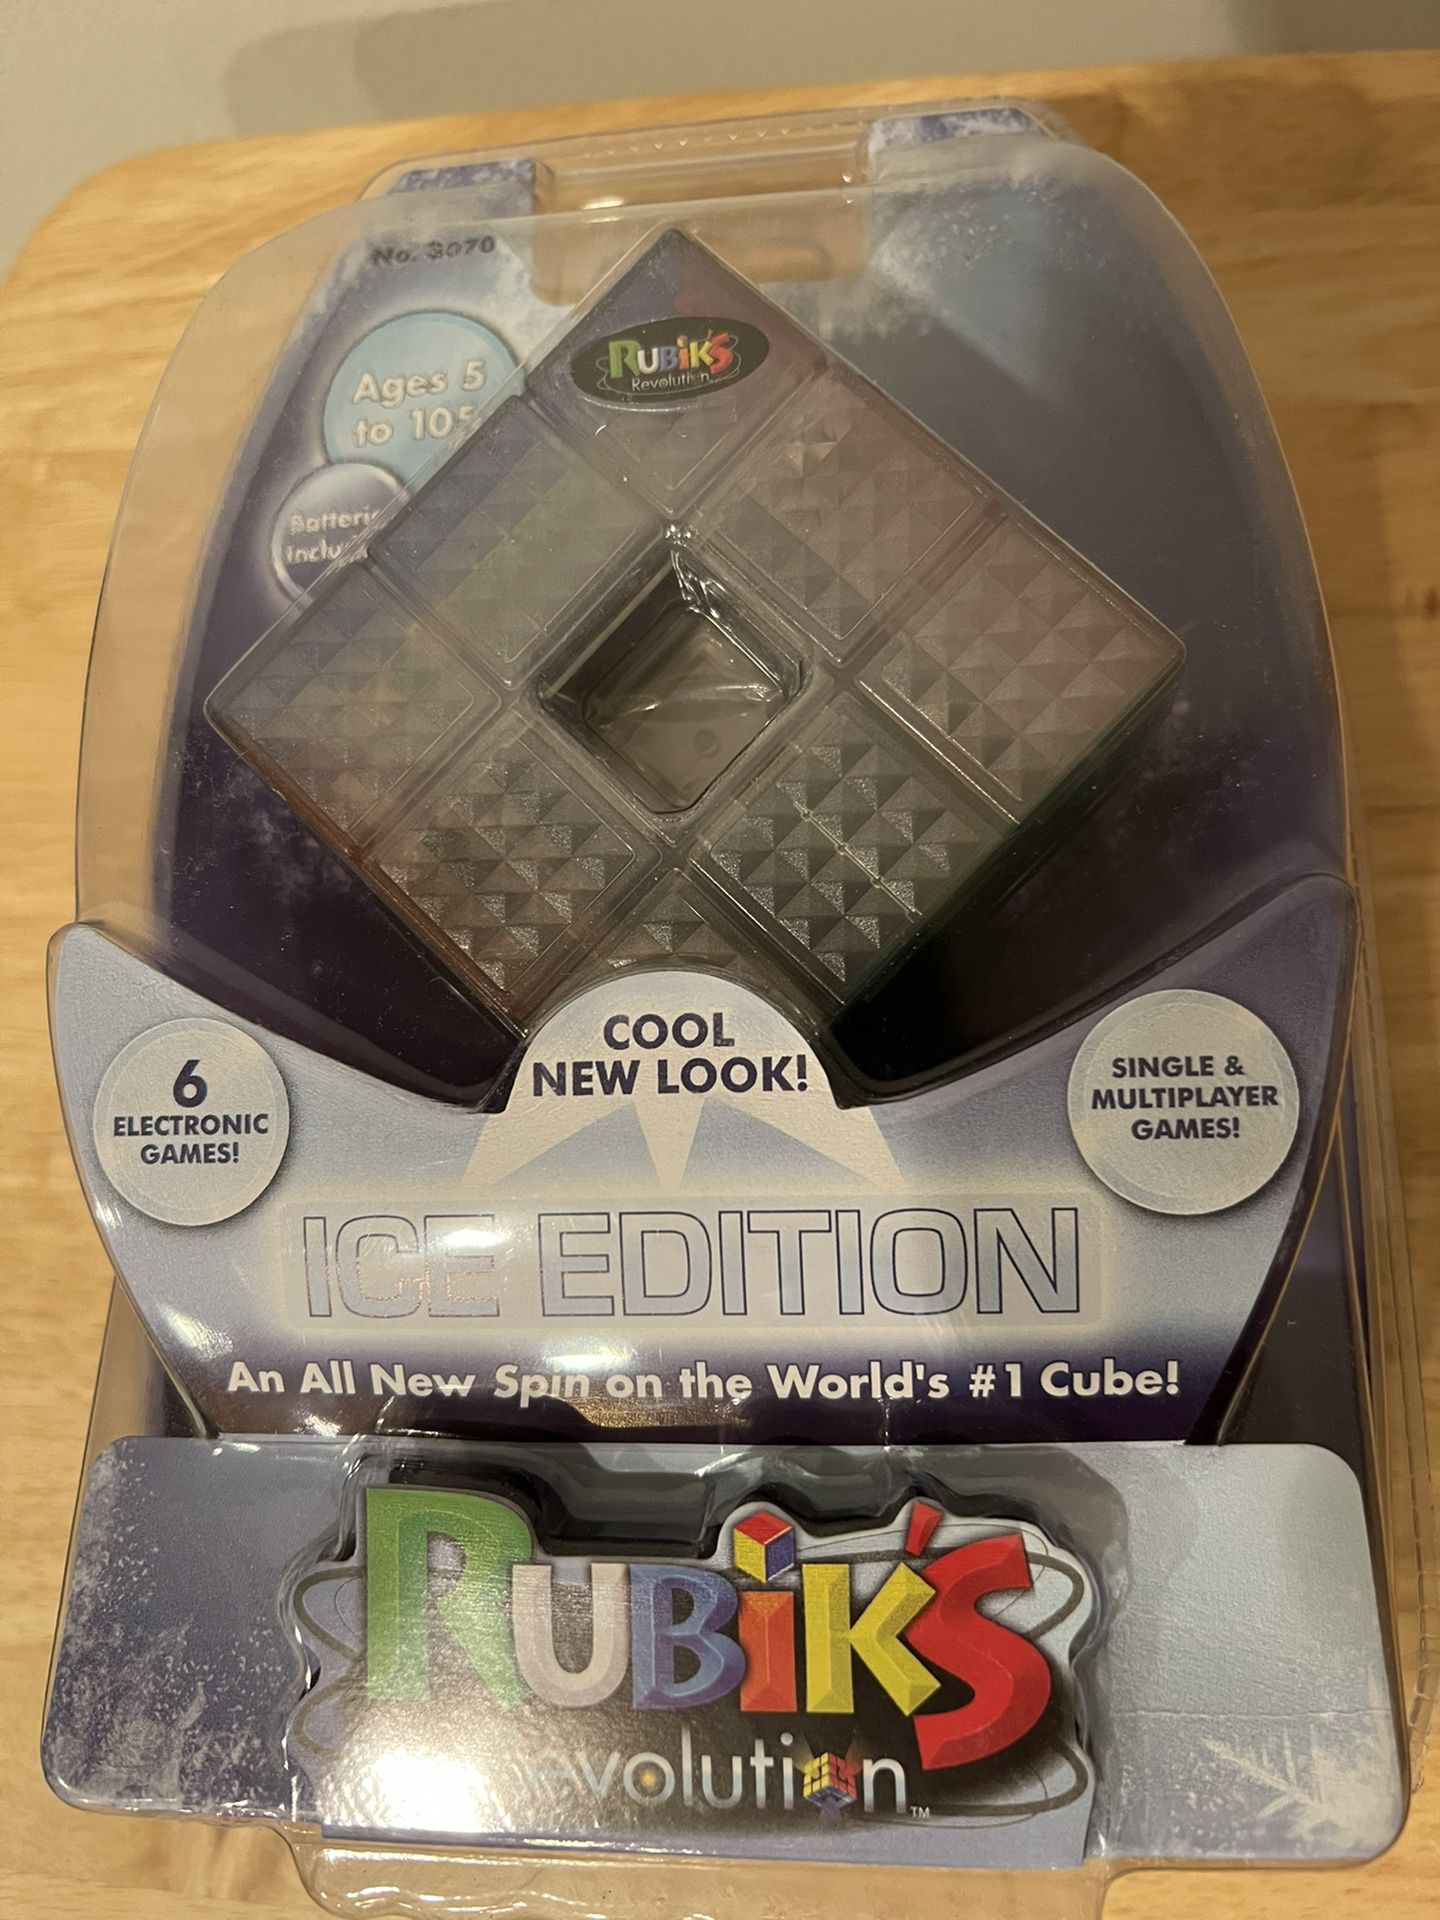 Rubik’s Revolution New Ice Edition Six Electronic Games for Single and Multiplayer Brand New - Never Used or Tested - Smoke Free House